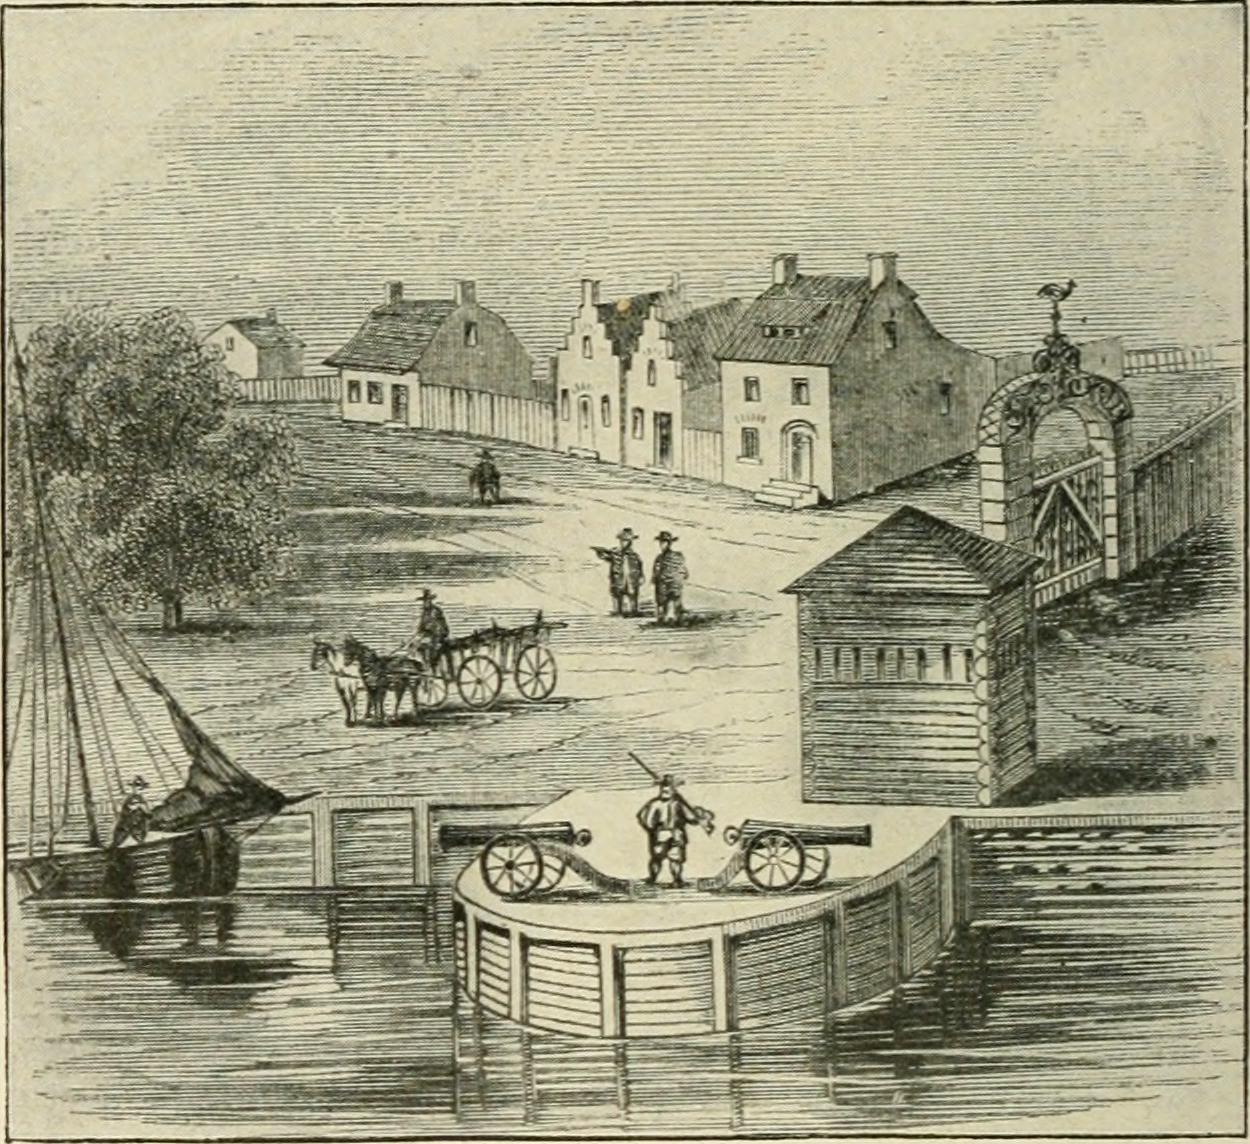 "The Plaine" -- where the trees are to the left -- is where Bowling Green would eventually be constructed. This depicts the early Dutch years. (Courtesy the Internet Book Archive)